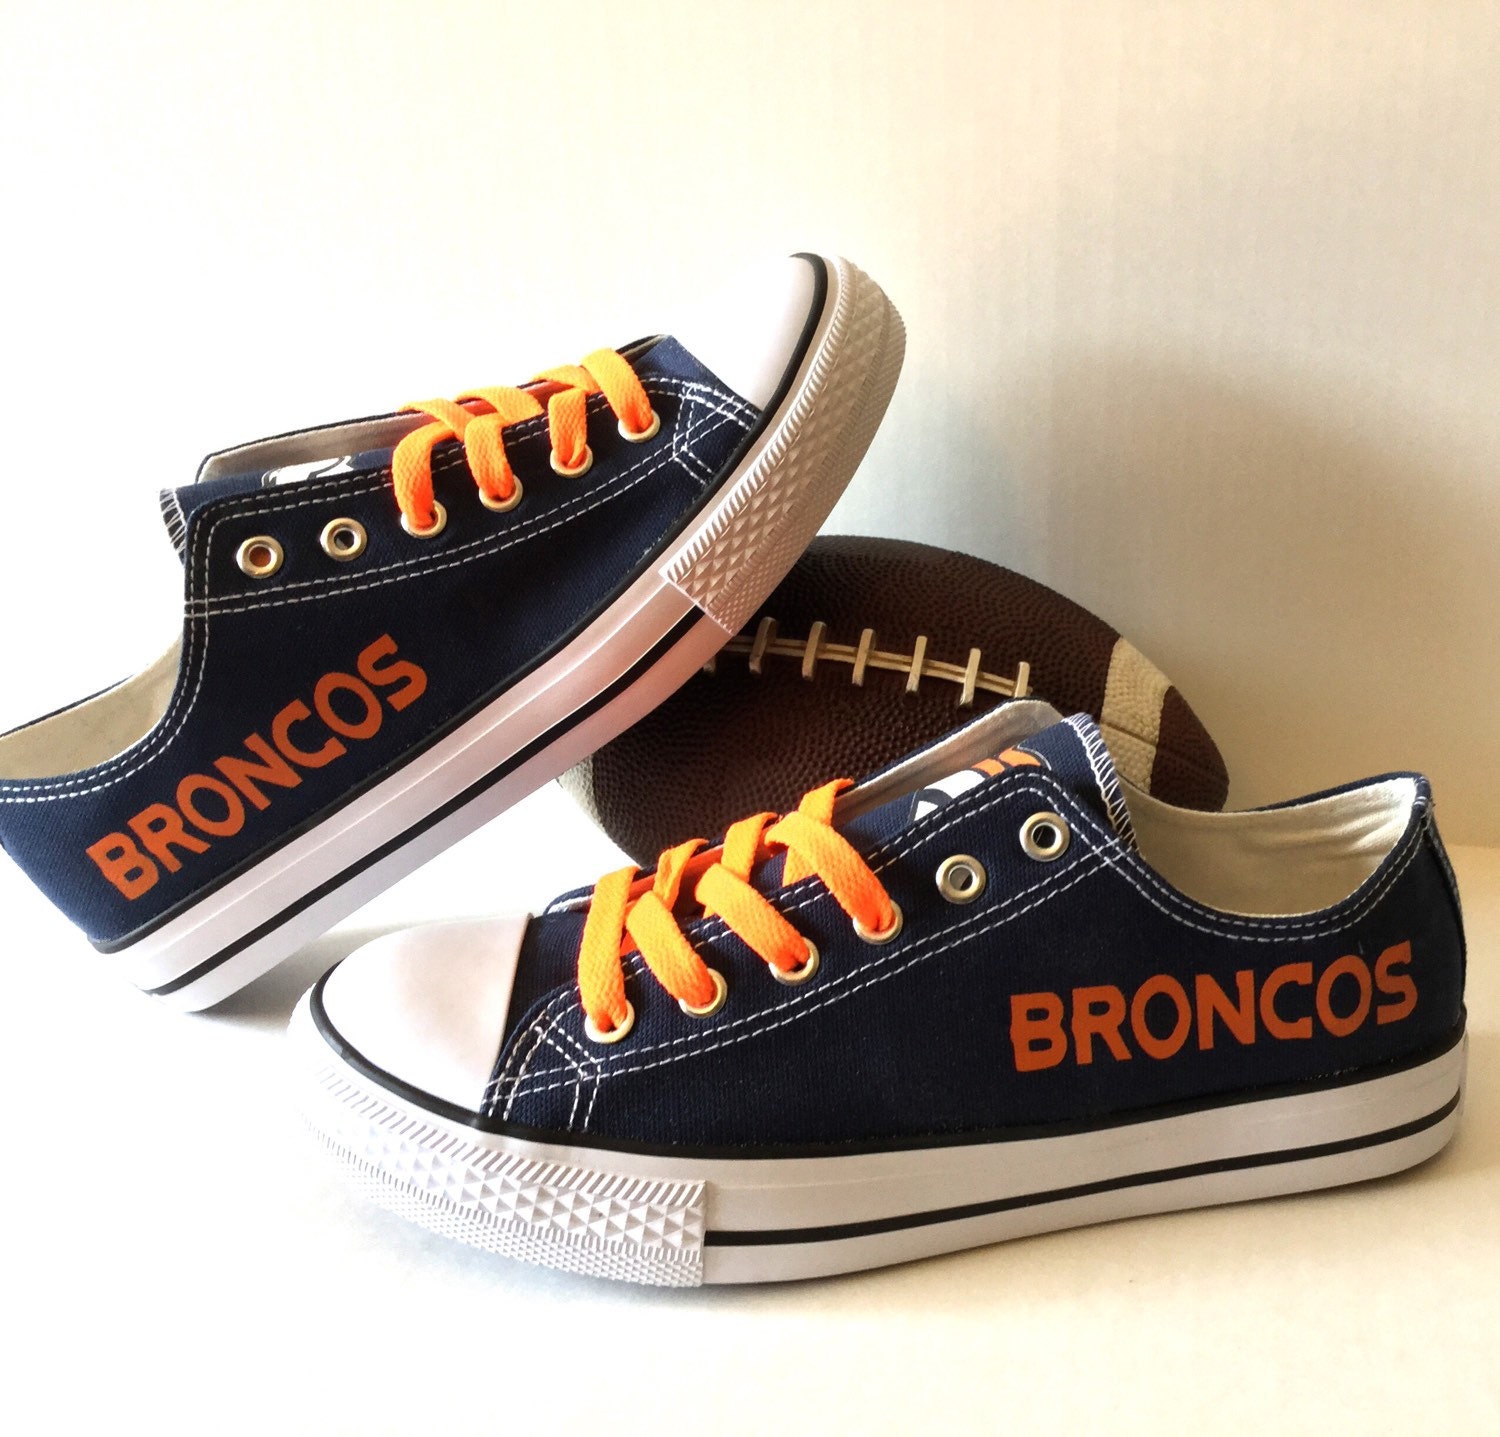 Denver Broncos Women's Athletic Shoes by Sportzunlimited